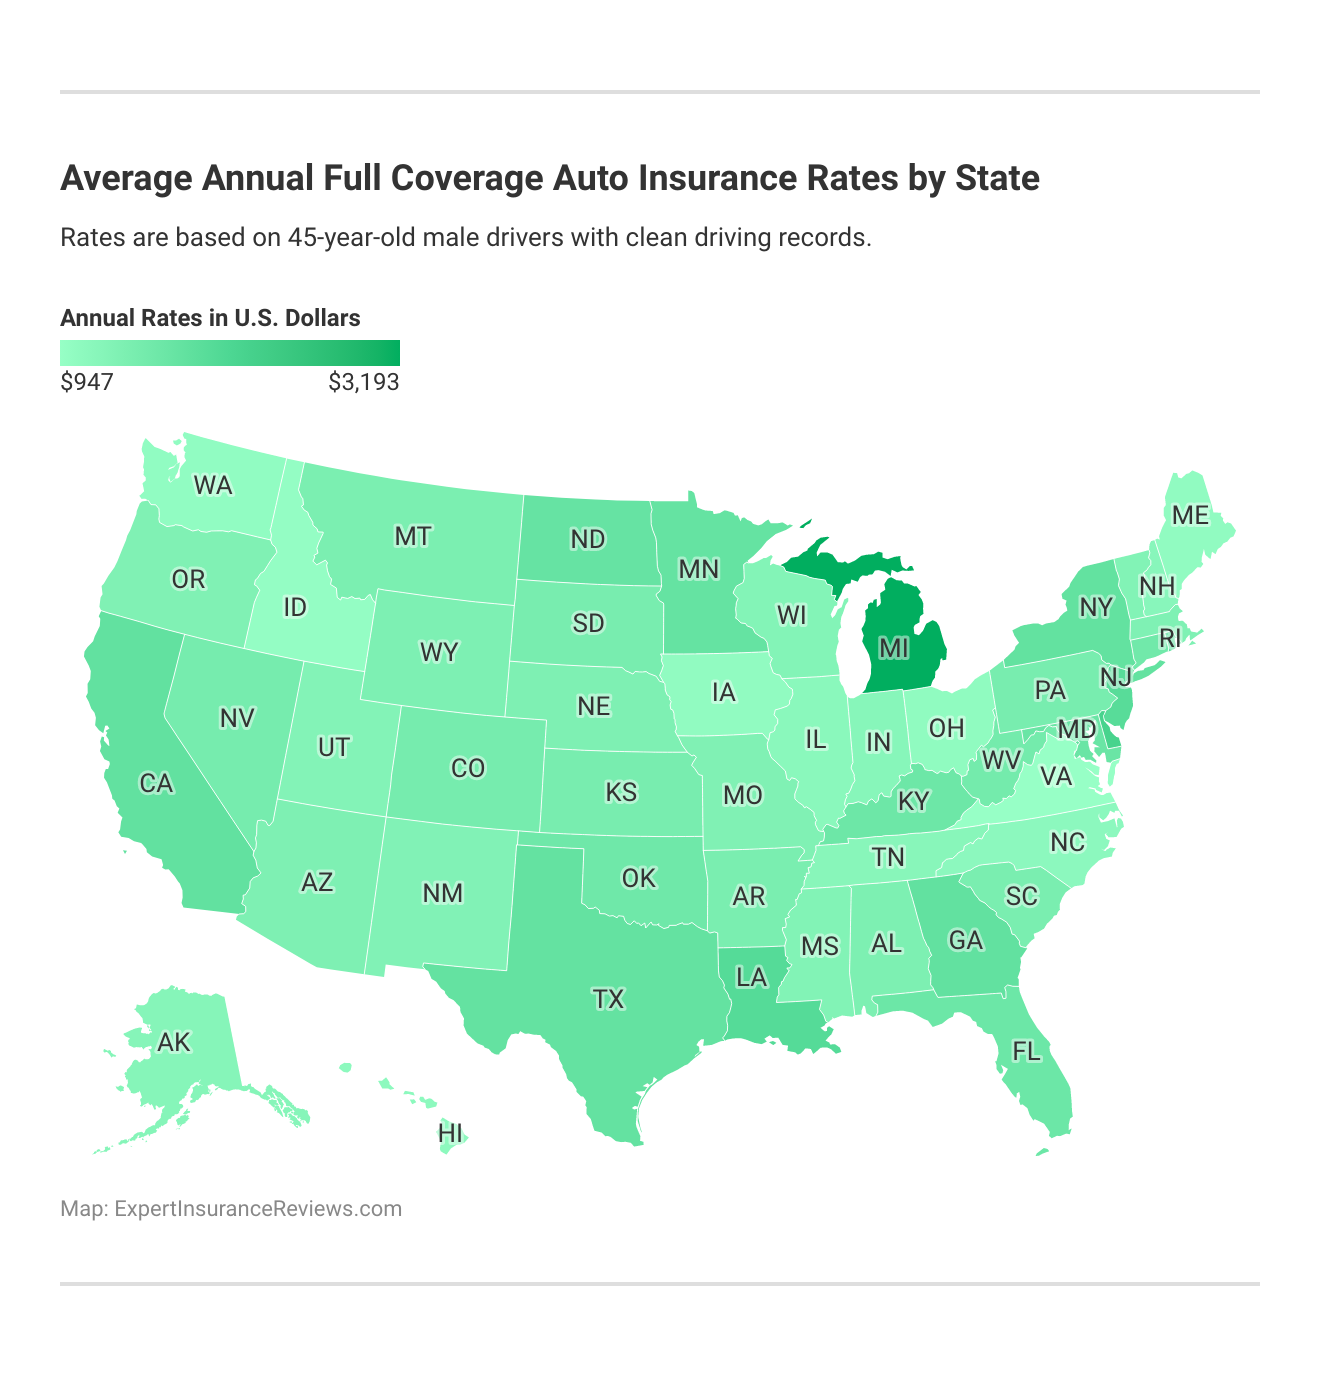 <b>Average Annual Full Coverage Auto Insurance Rates by State</b>